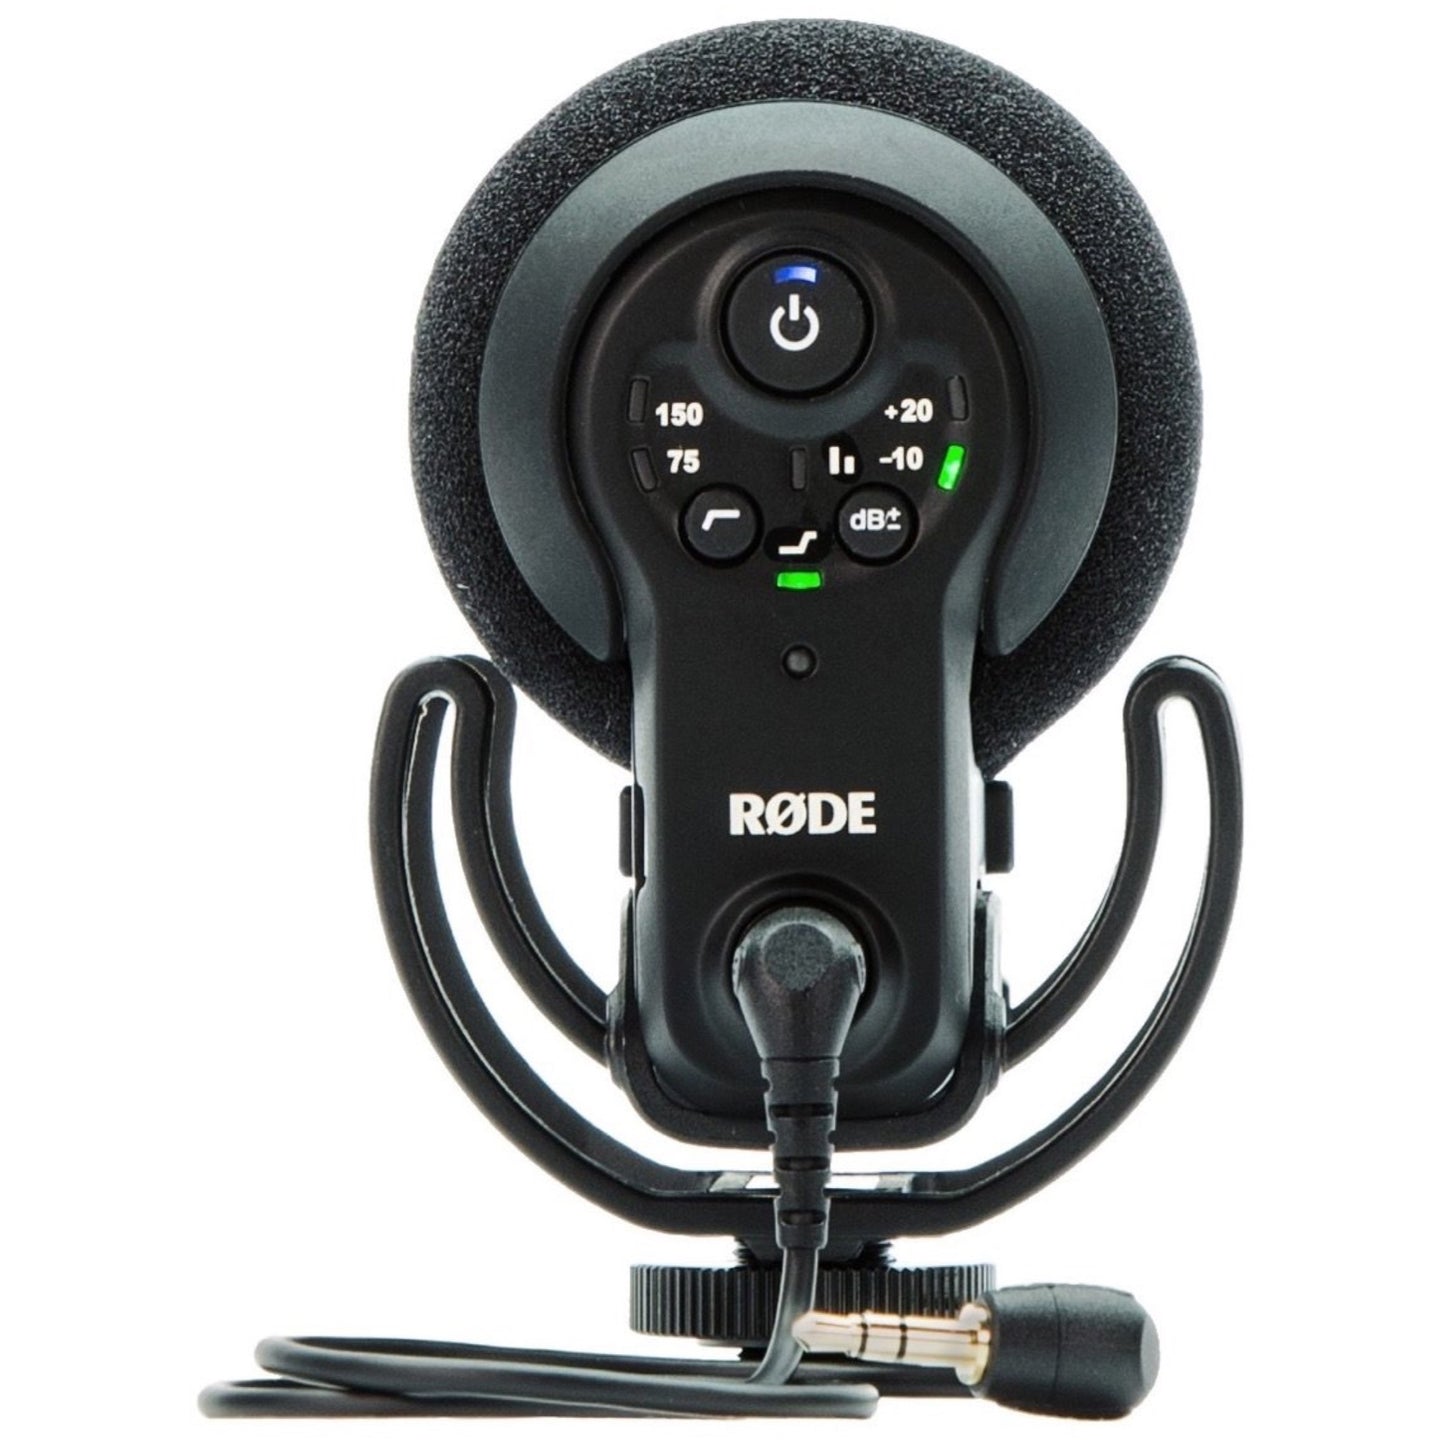 Rode VideoMic Pro Plus Compact Directional On-Camera Microphone